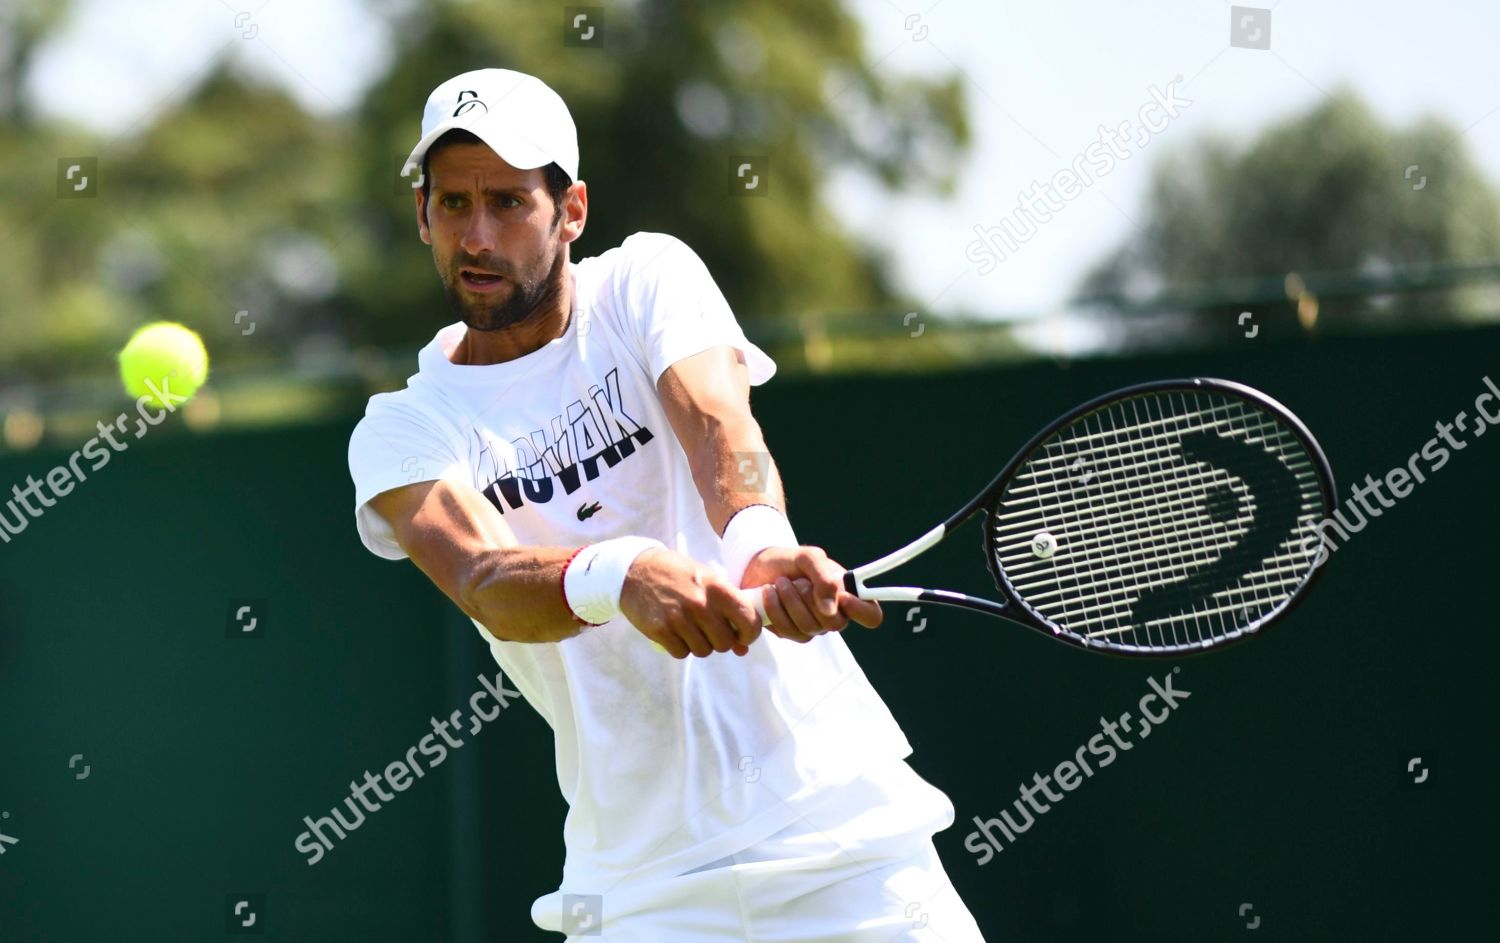 wimbledon-tennis-championships-sunday-practice-the-all-england-lawn-tennis-and-croquet-club-london-uk-shutterstock-editorial-10322931ae.jpg